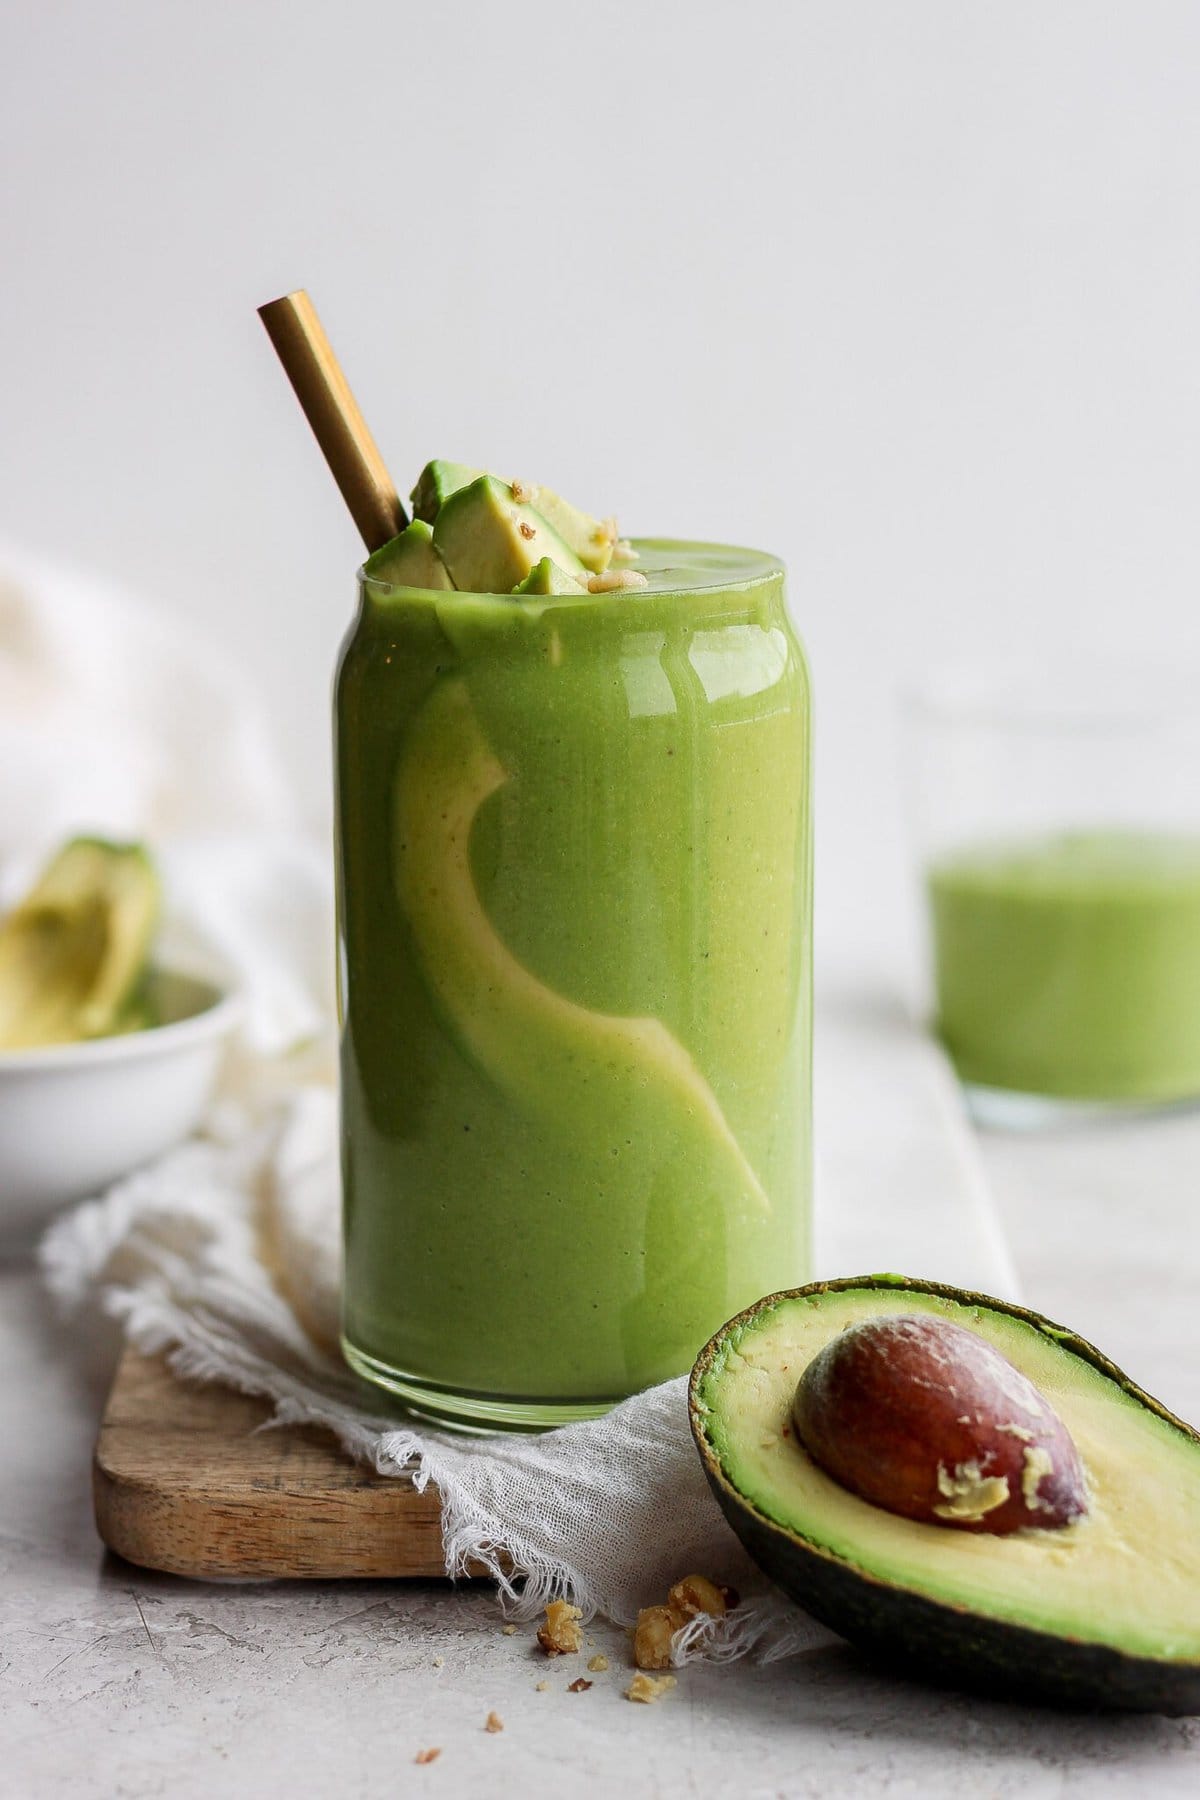 What Is The First Step Of Making The Avocado Juice From Bungo?